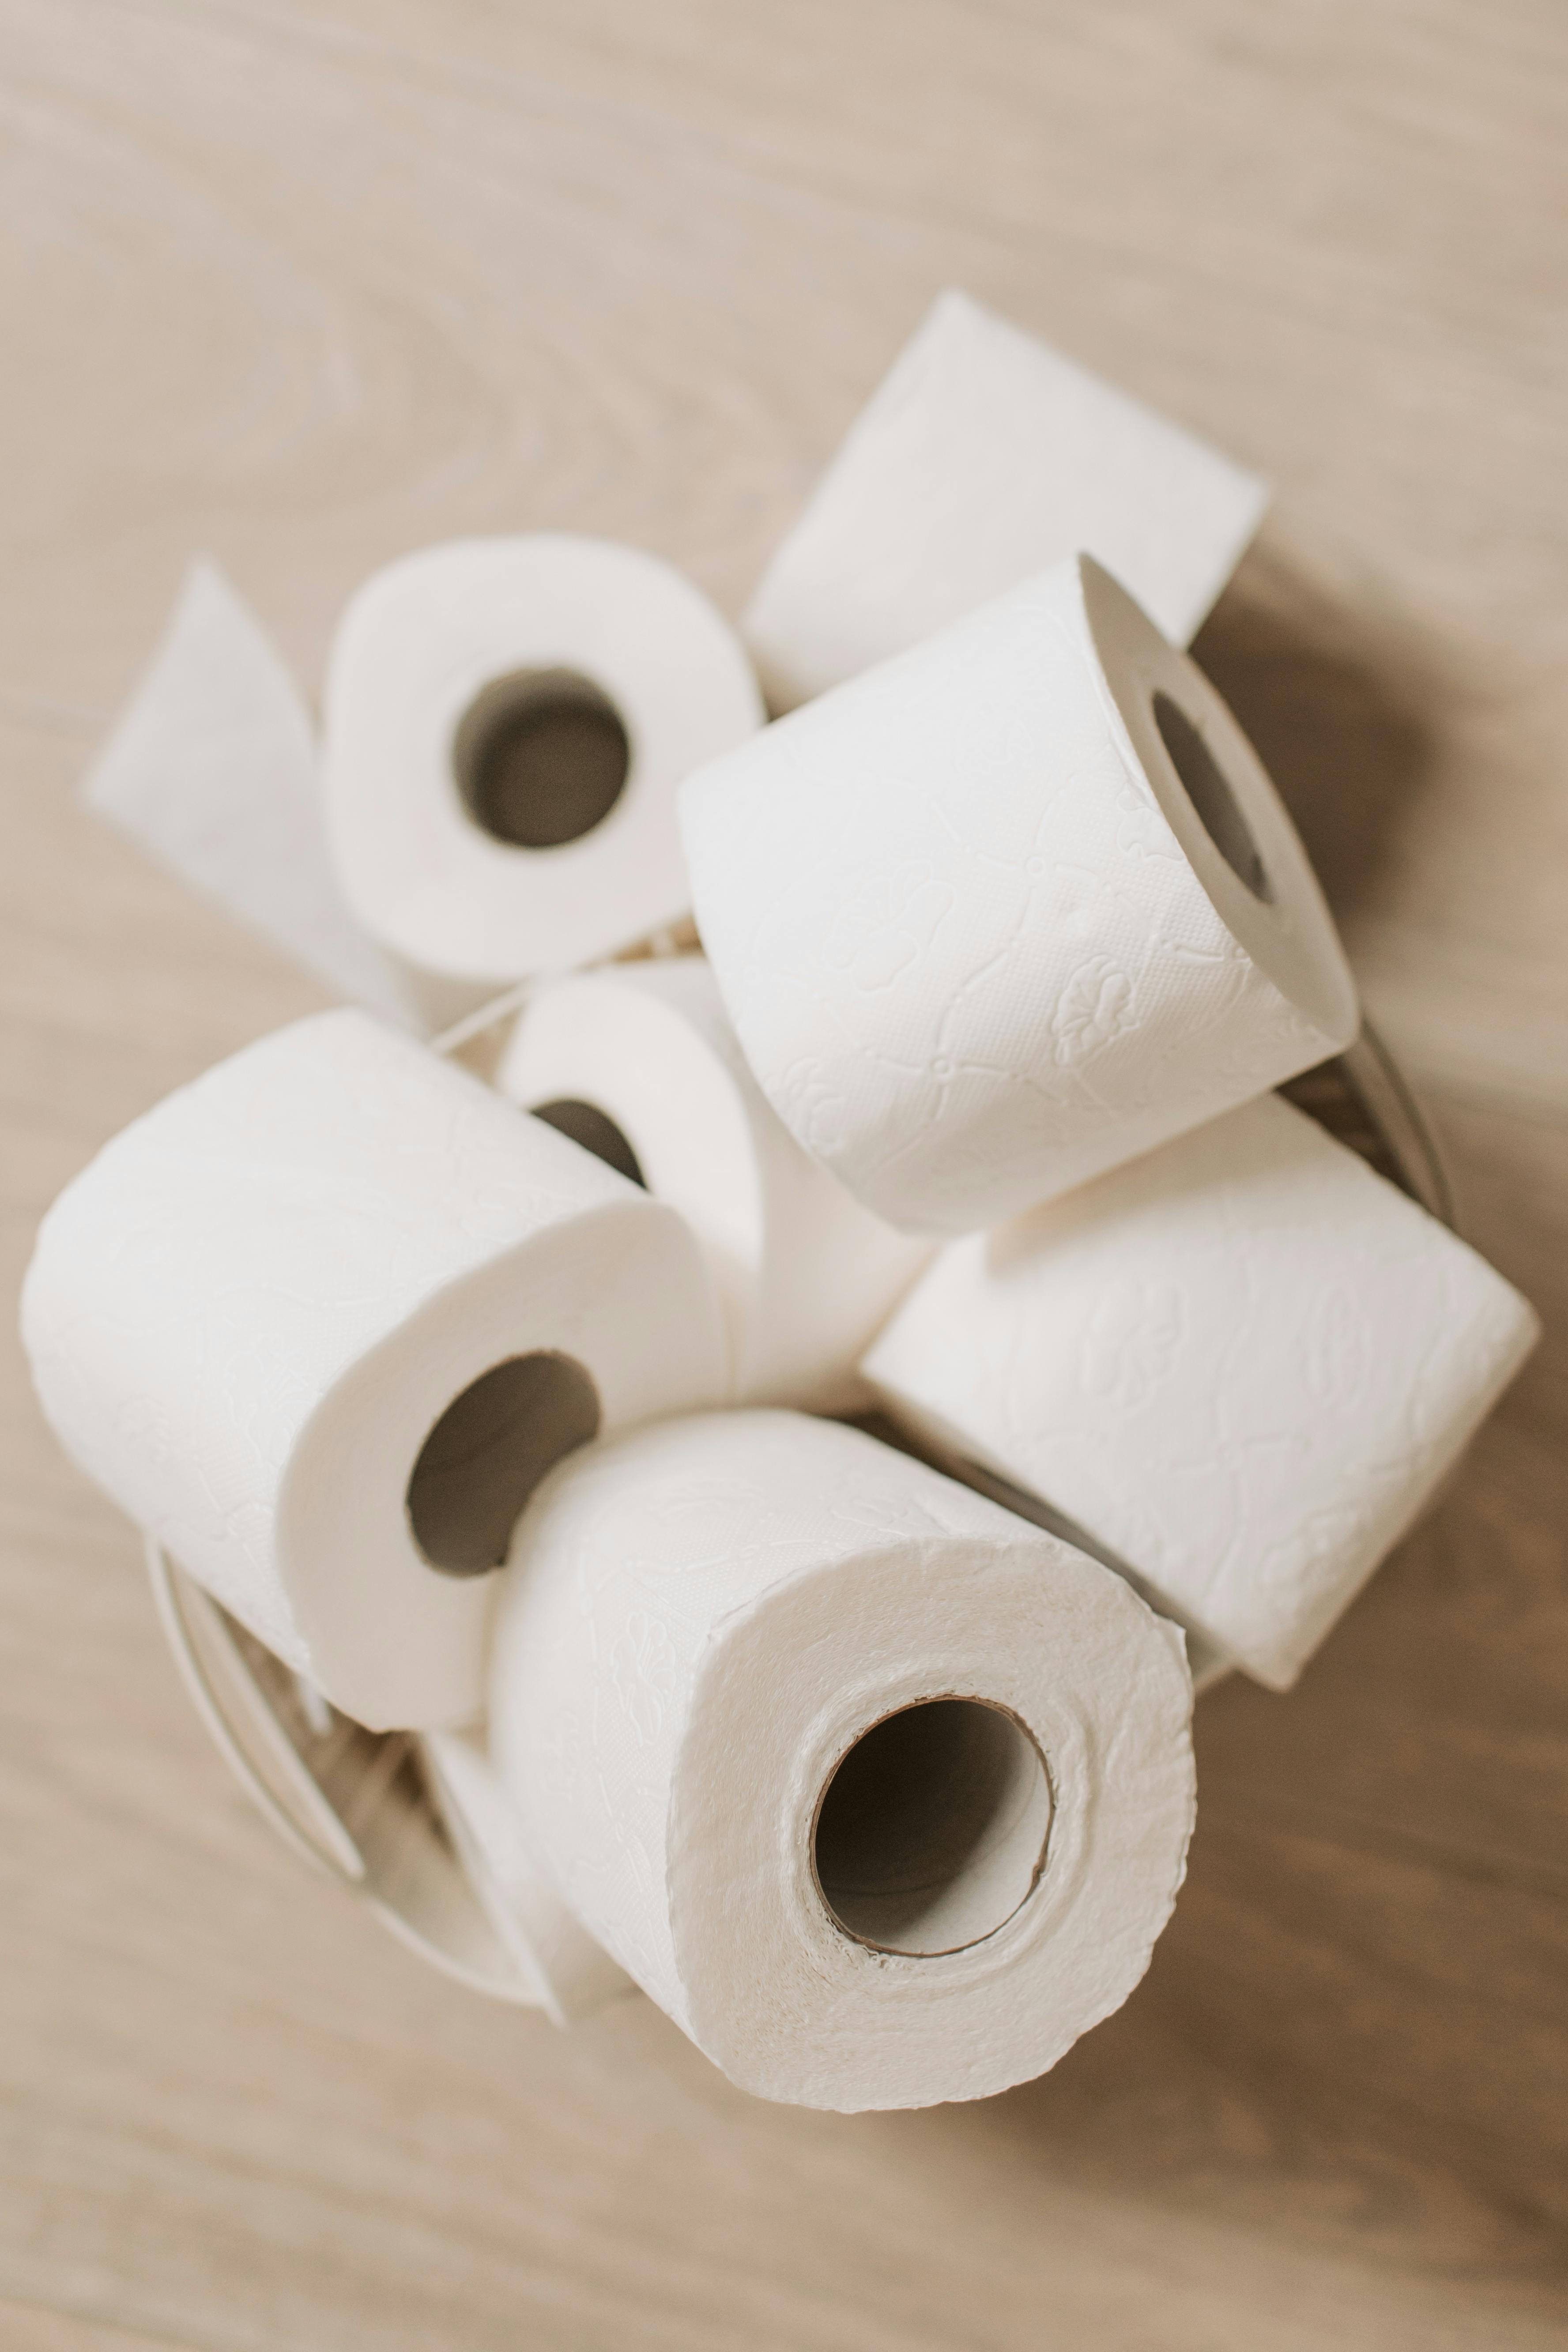 999+ Toilet Paper Pictures  Download Free Images on Unsplash